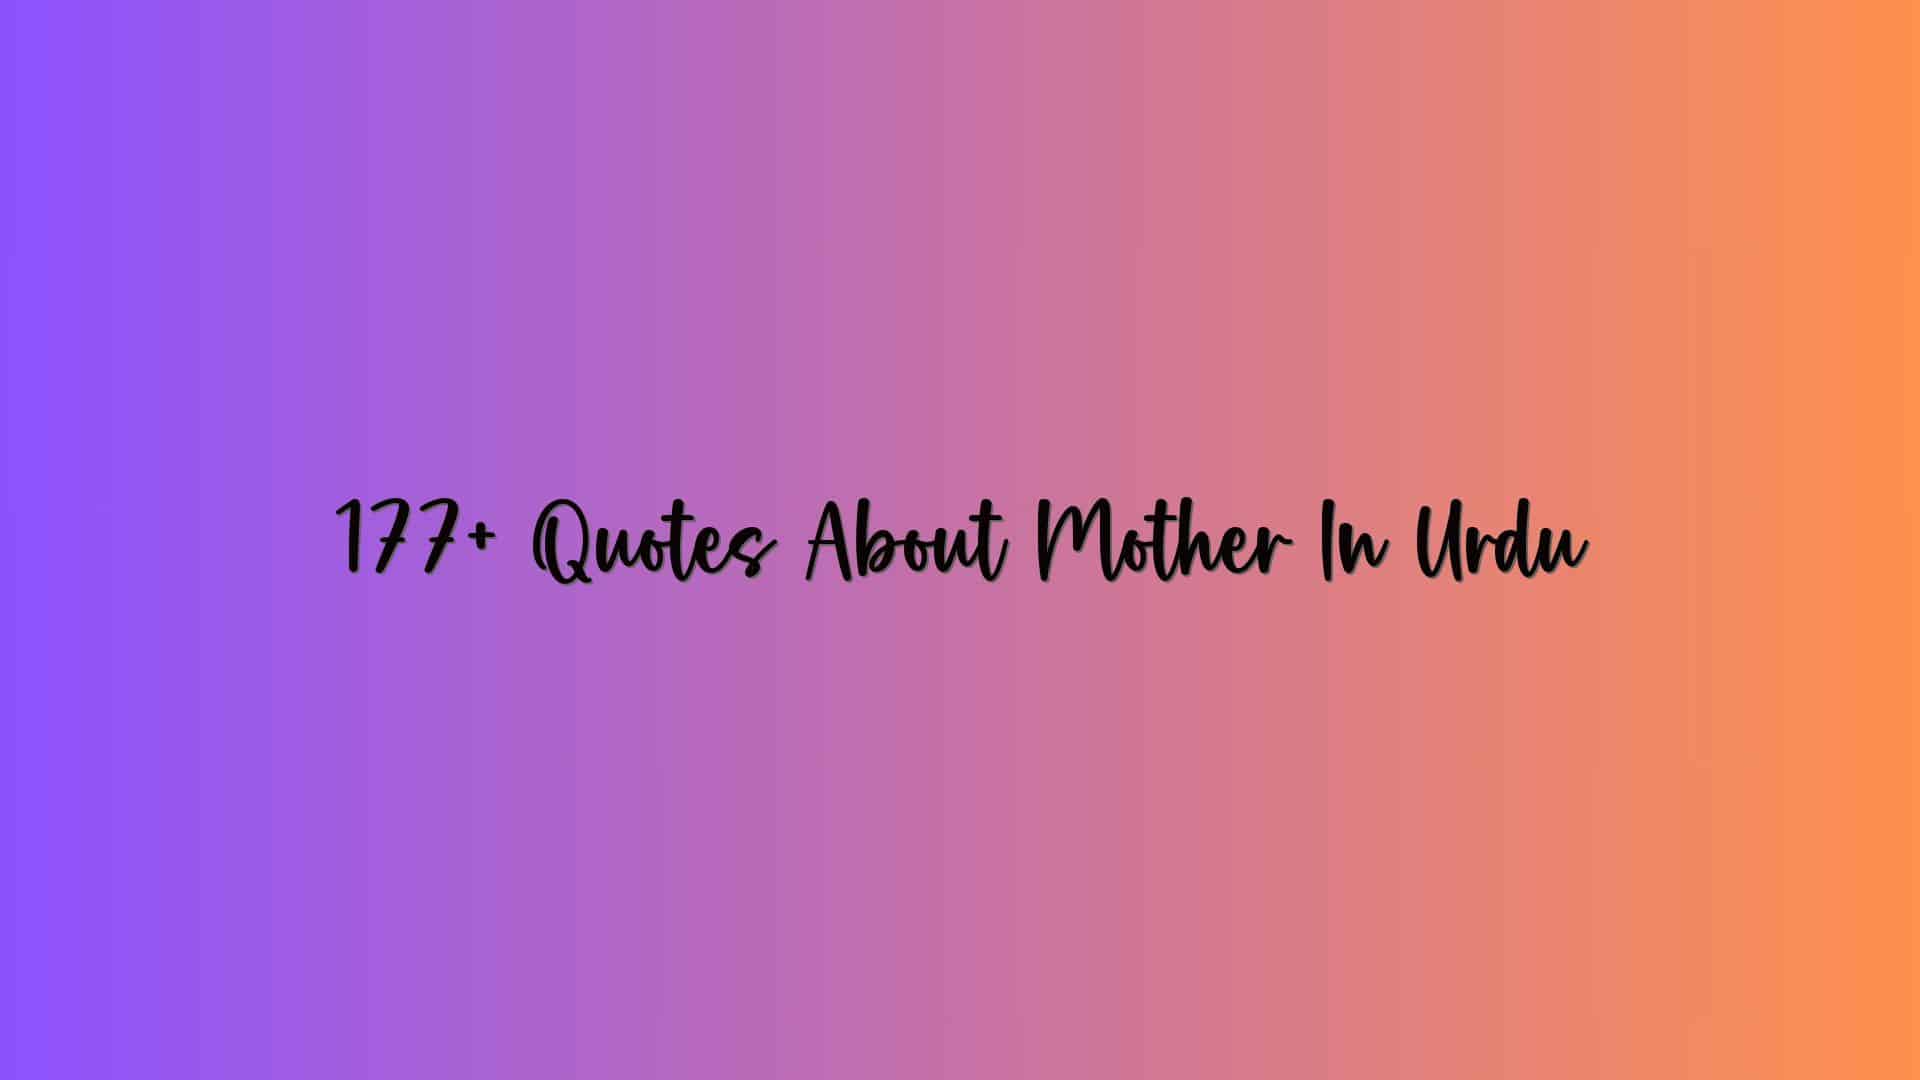 177+ Quotes About Mother In Urdu